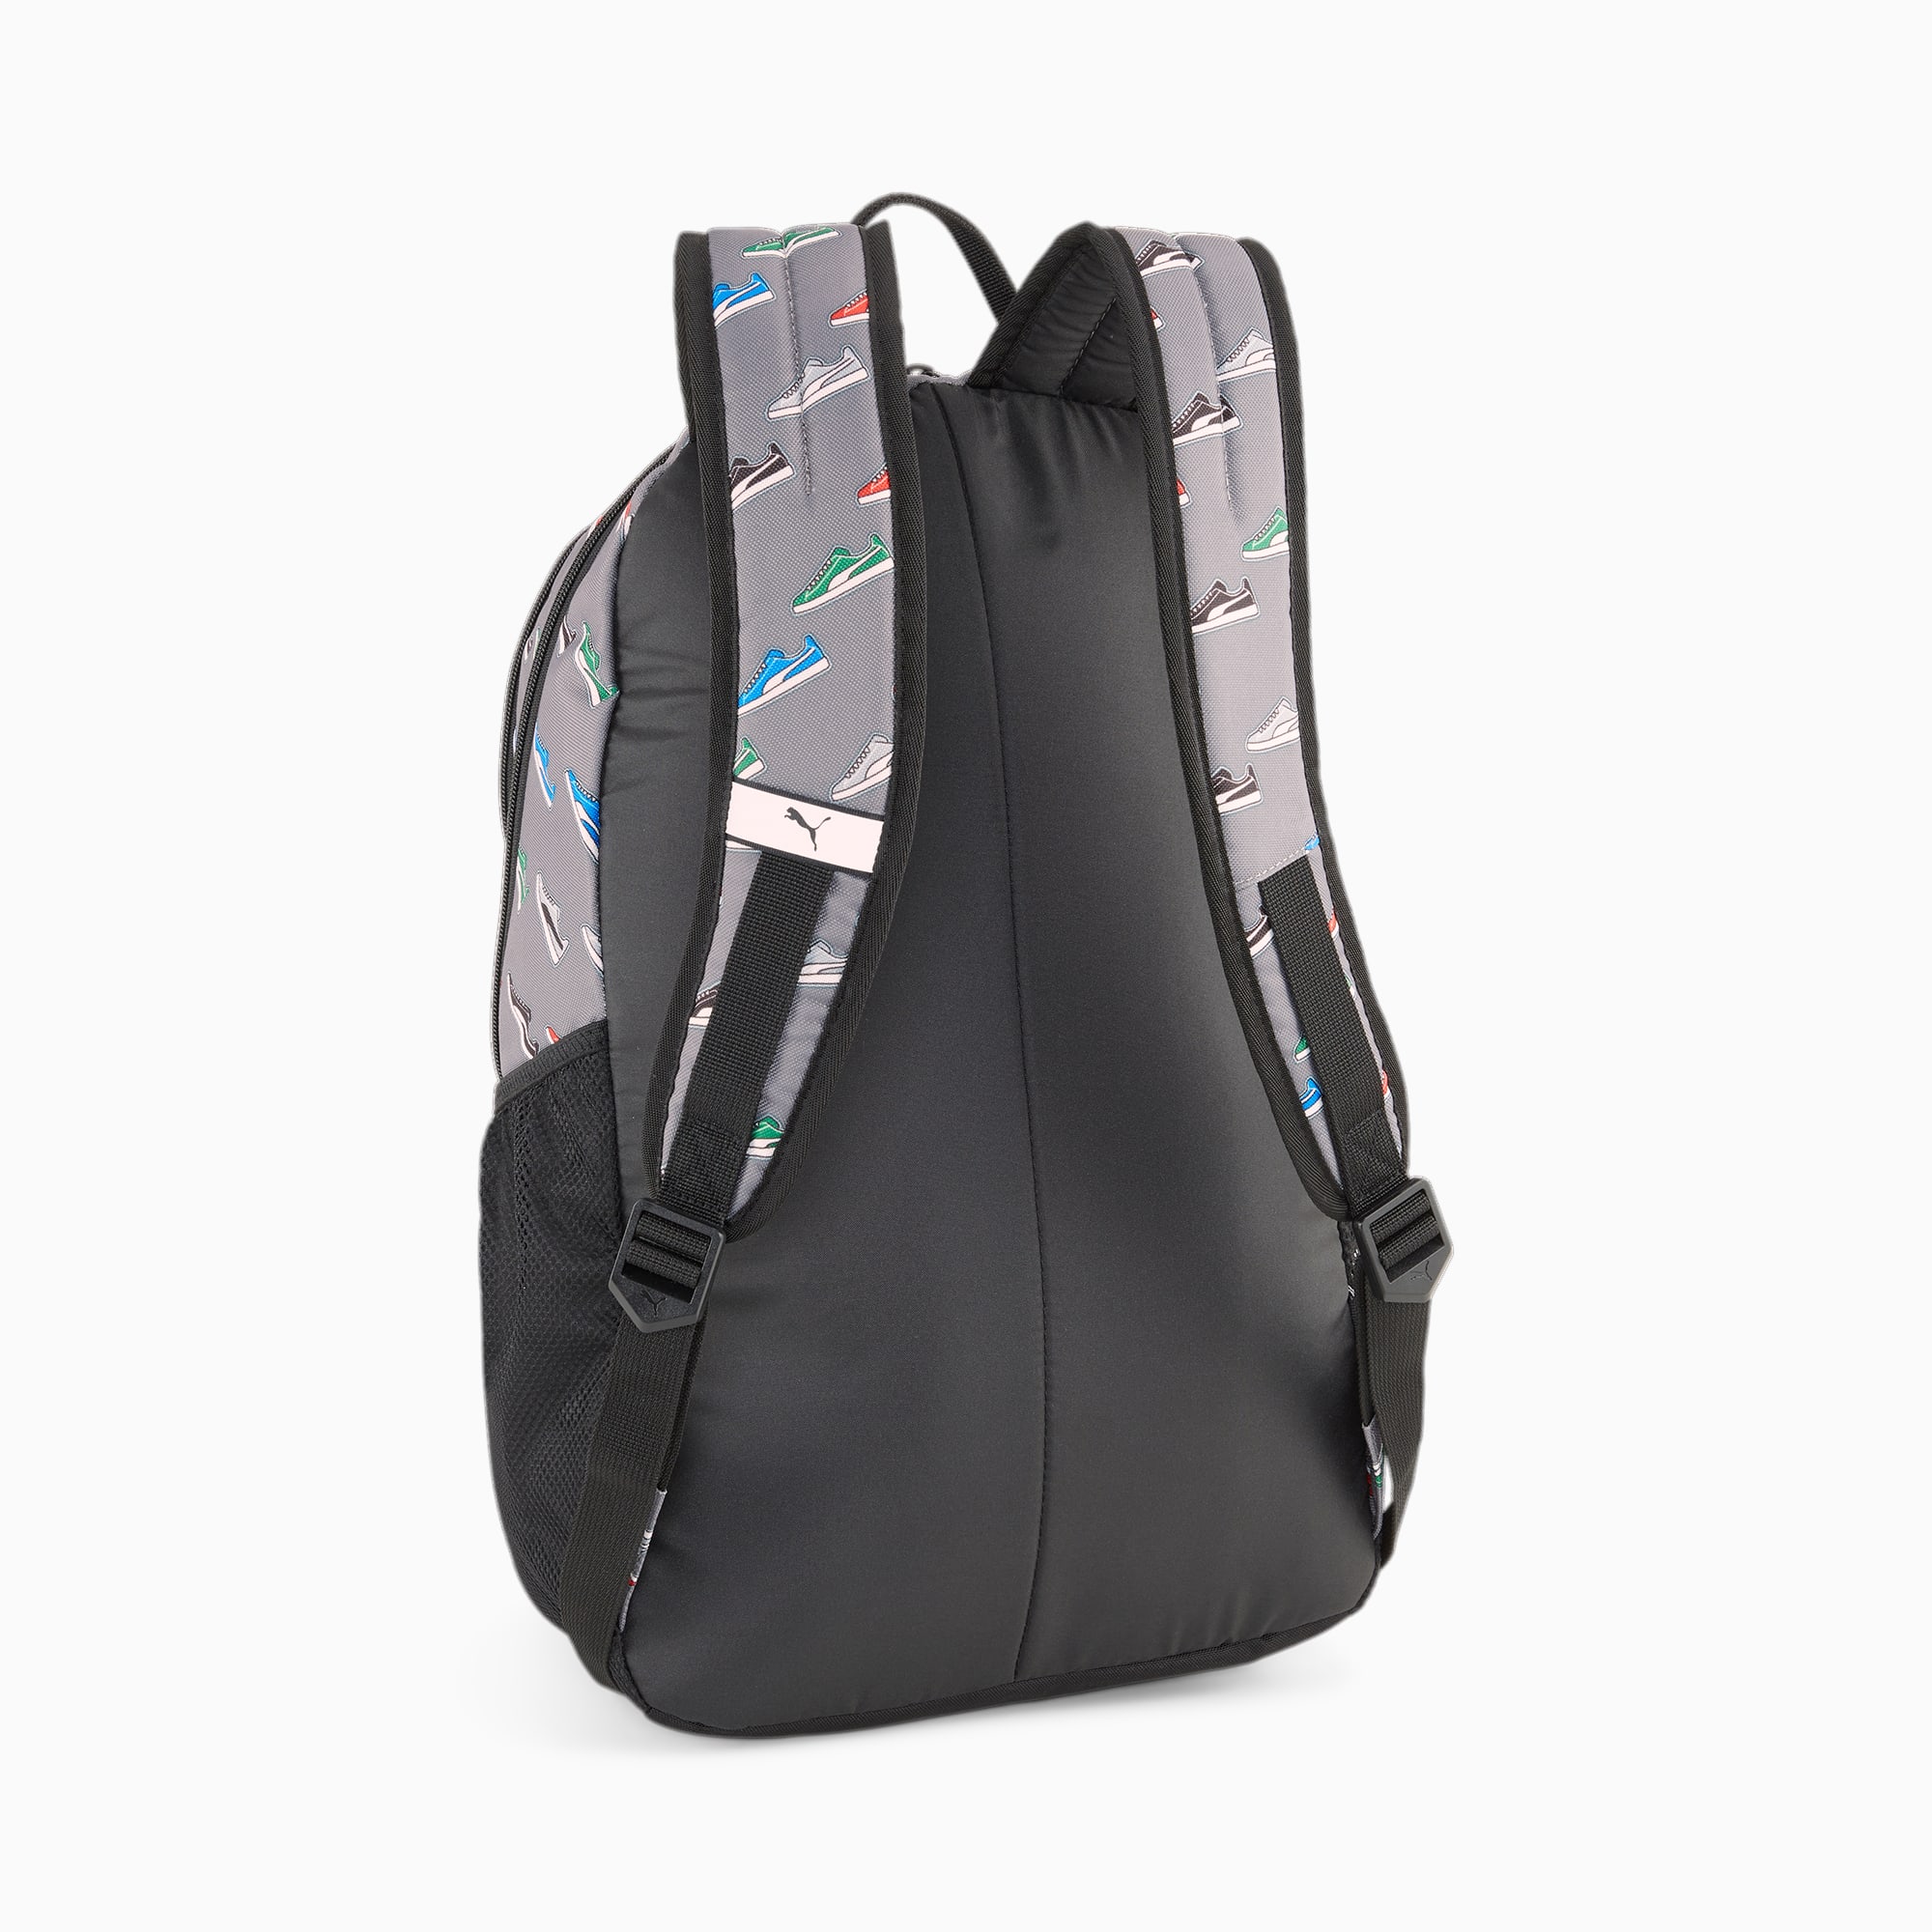 PUMA Academy Rucksack, Mit Abstract Muster, Grau, Accessoires